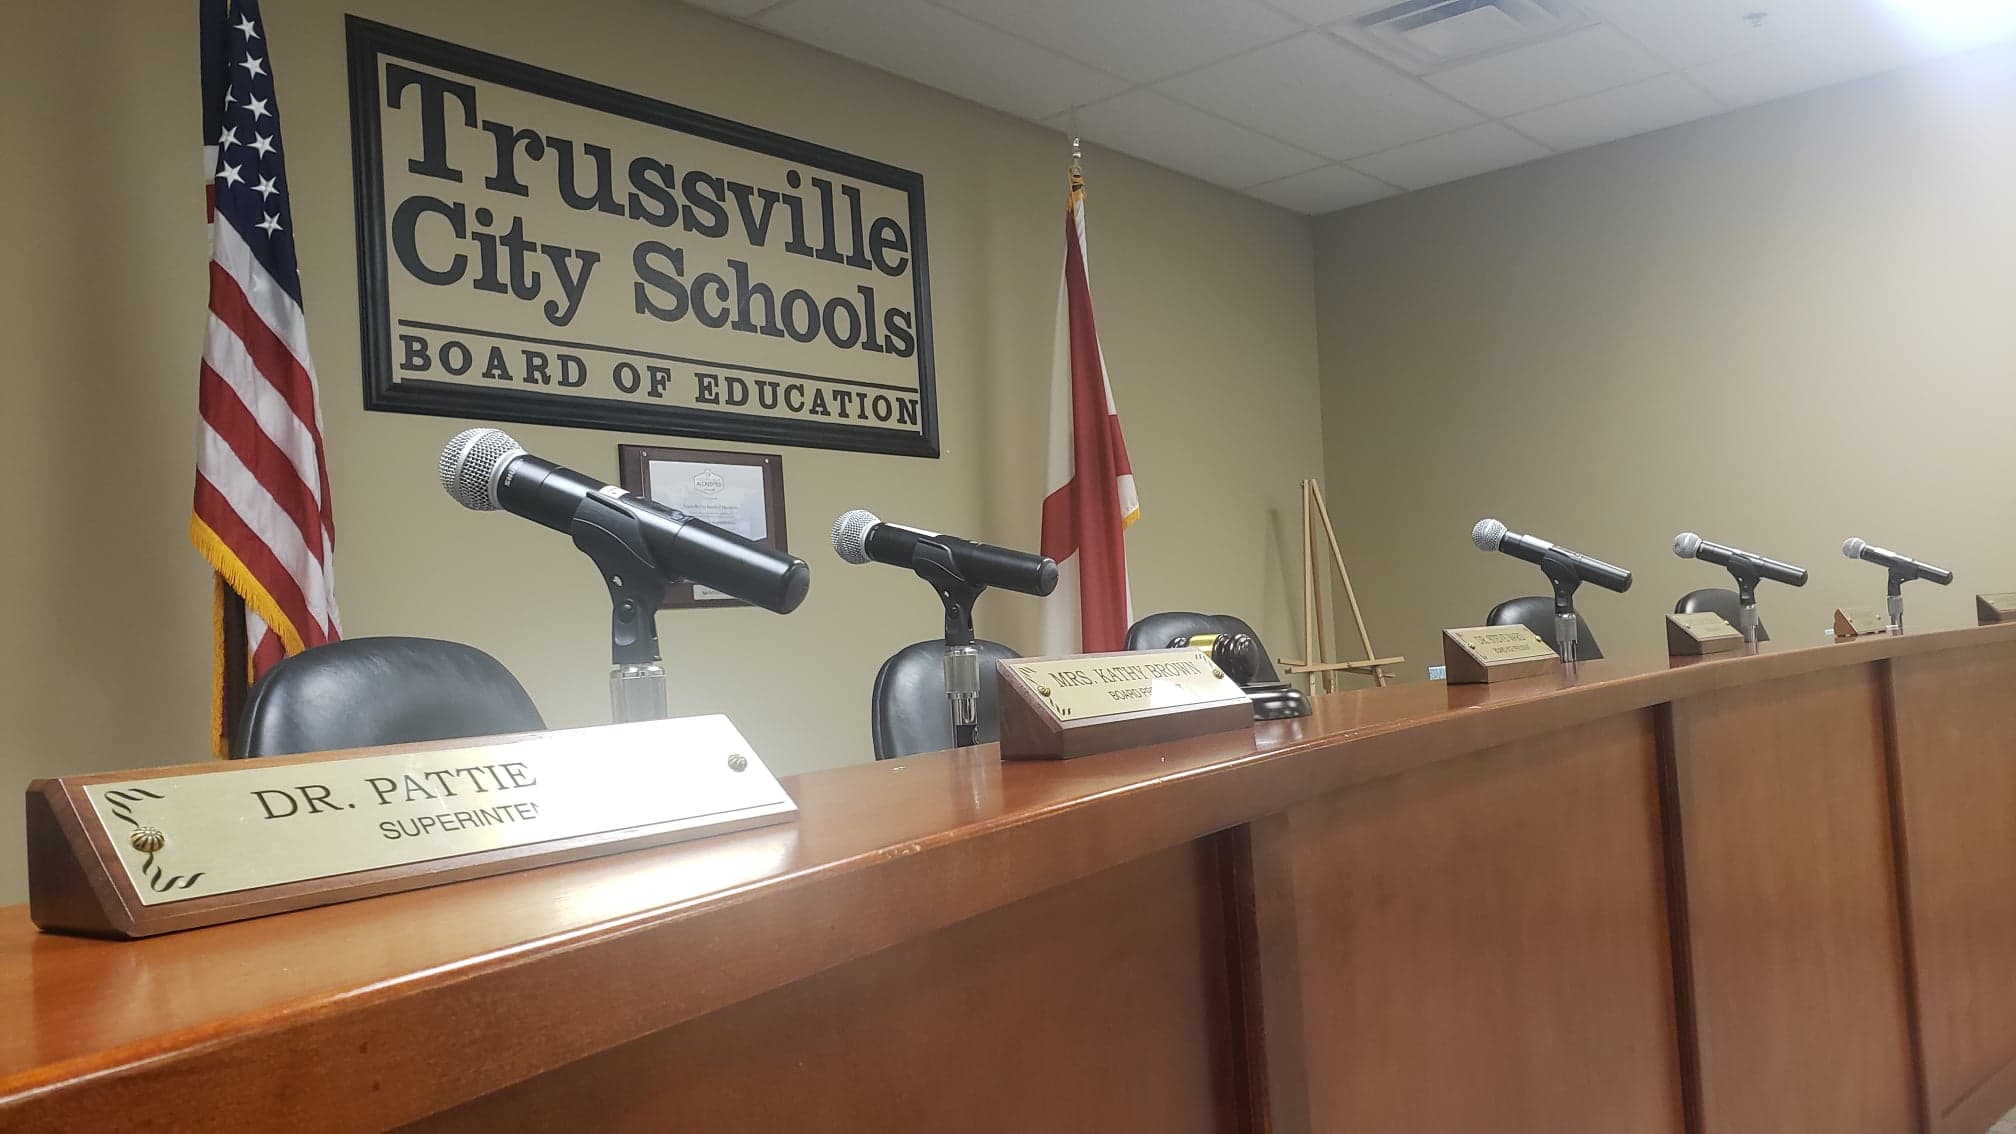 VIDEO: Trussville City Schools Board of Education meets online, elects officers for 2020-21 school year